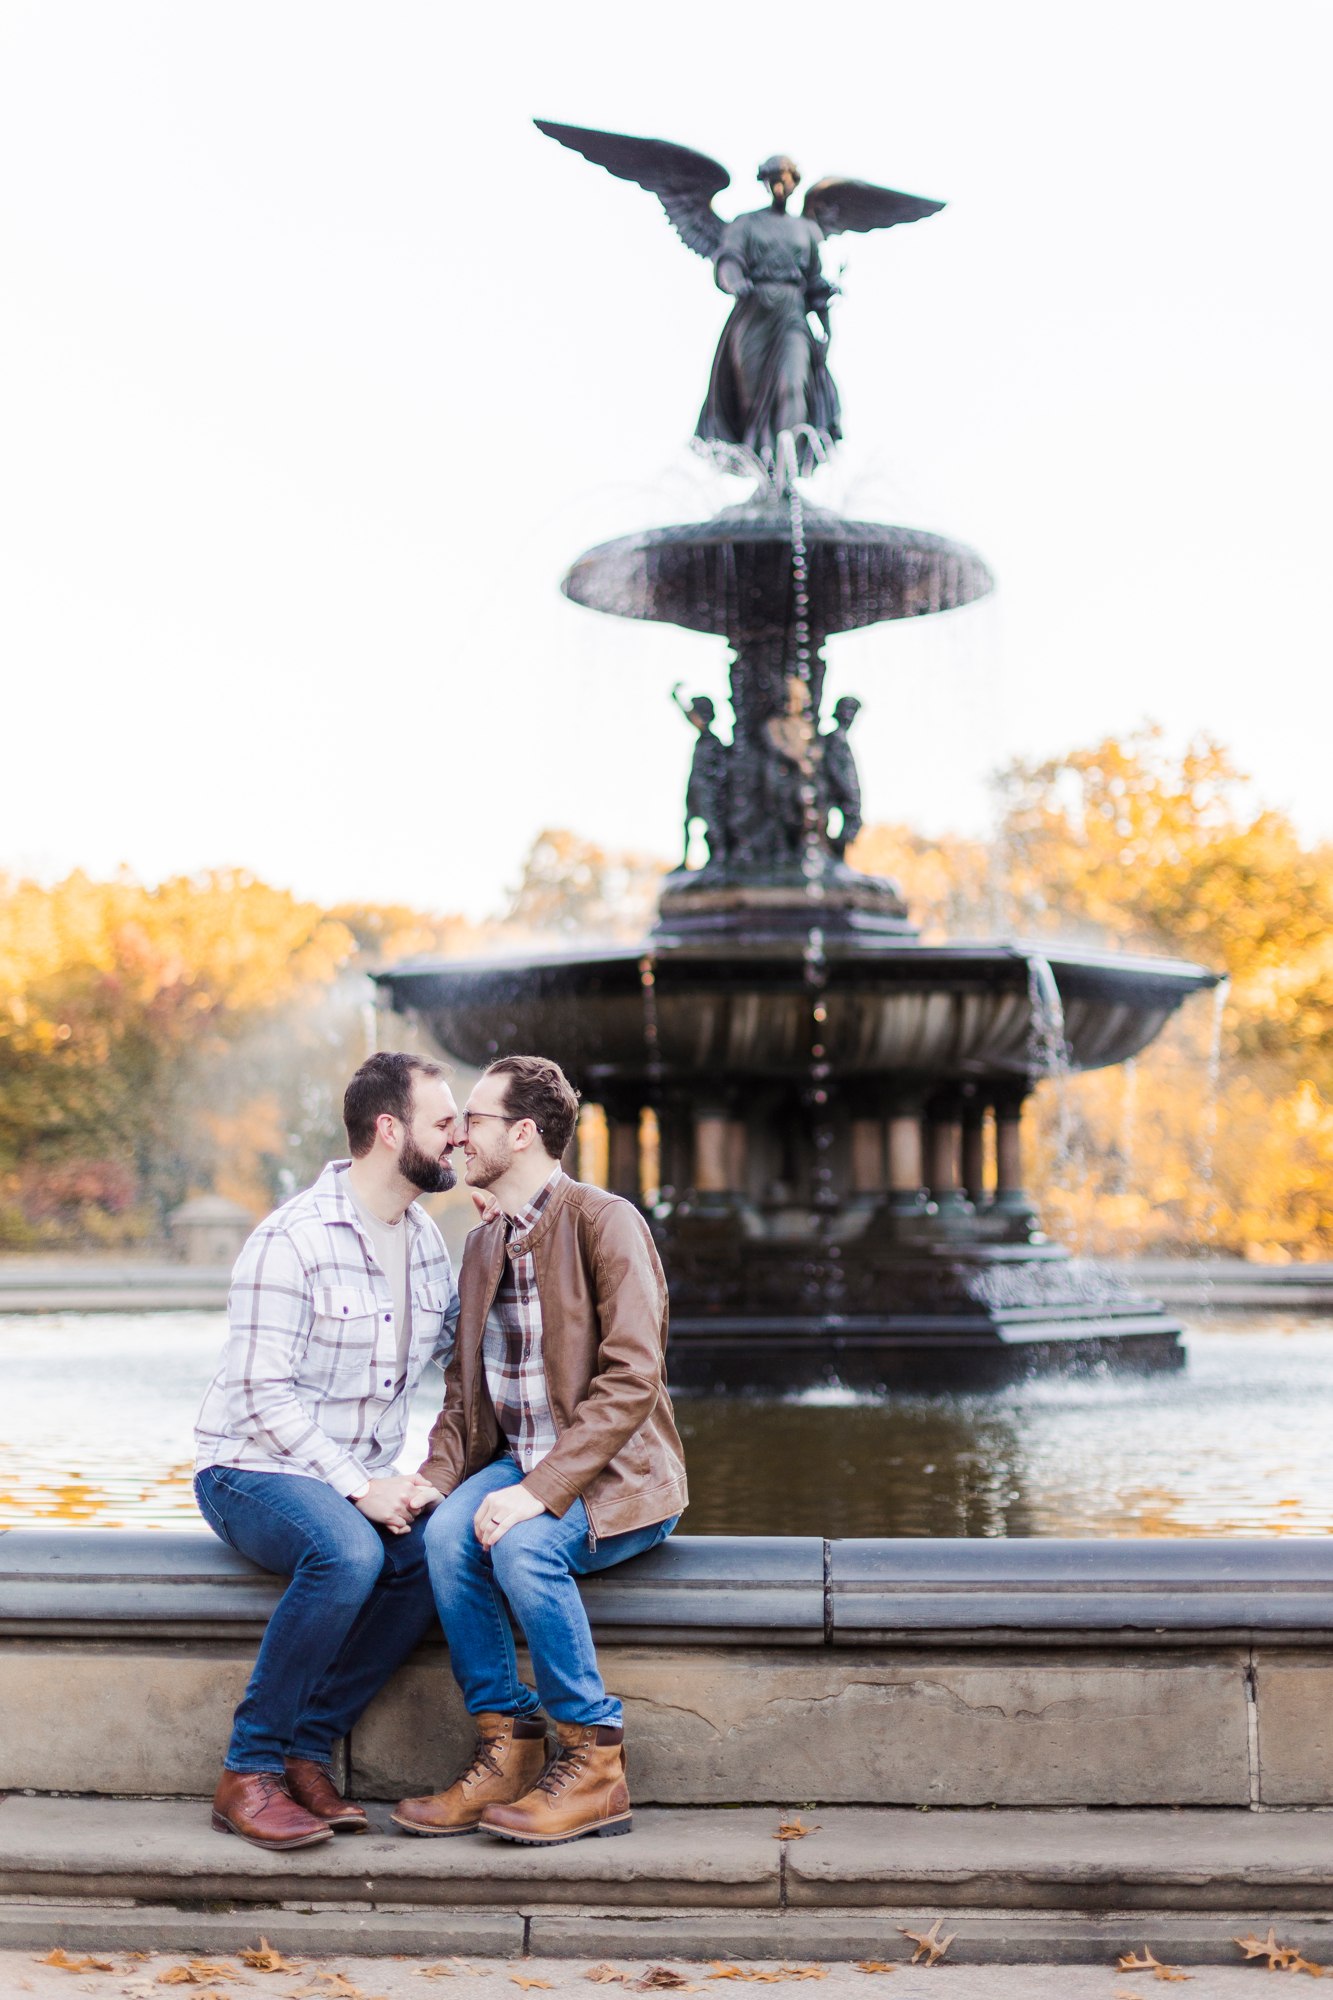 Cheerful Engagement Photo Shoot in Central Park